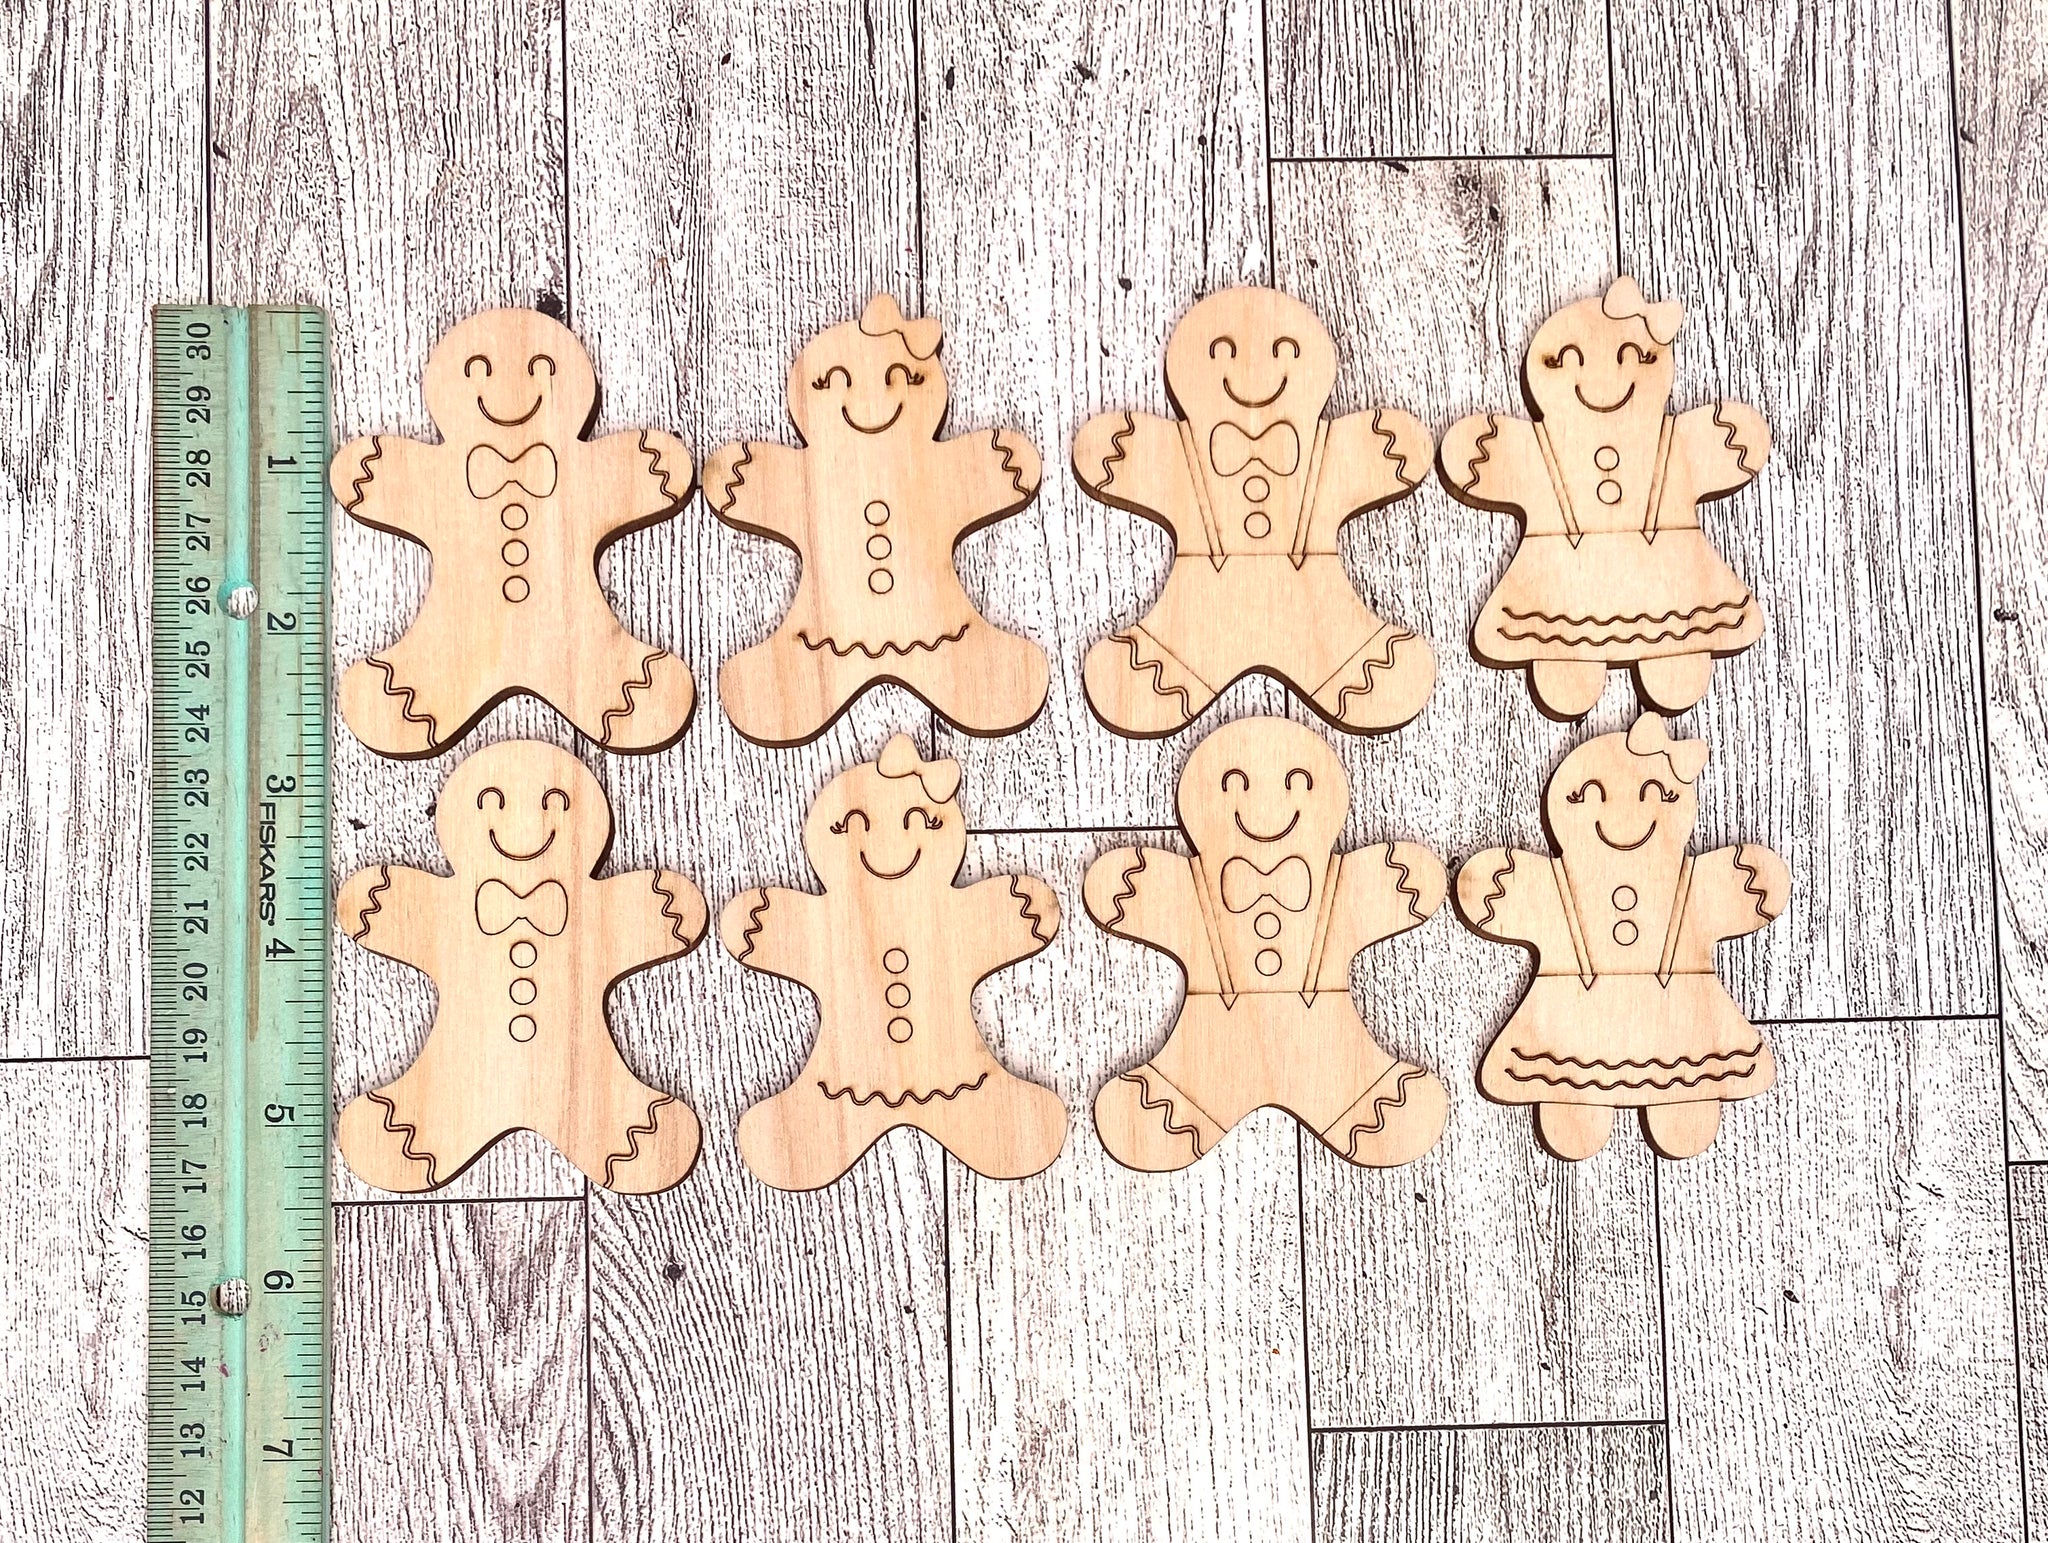 Set of family gingies (8 total)